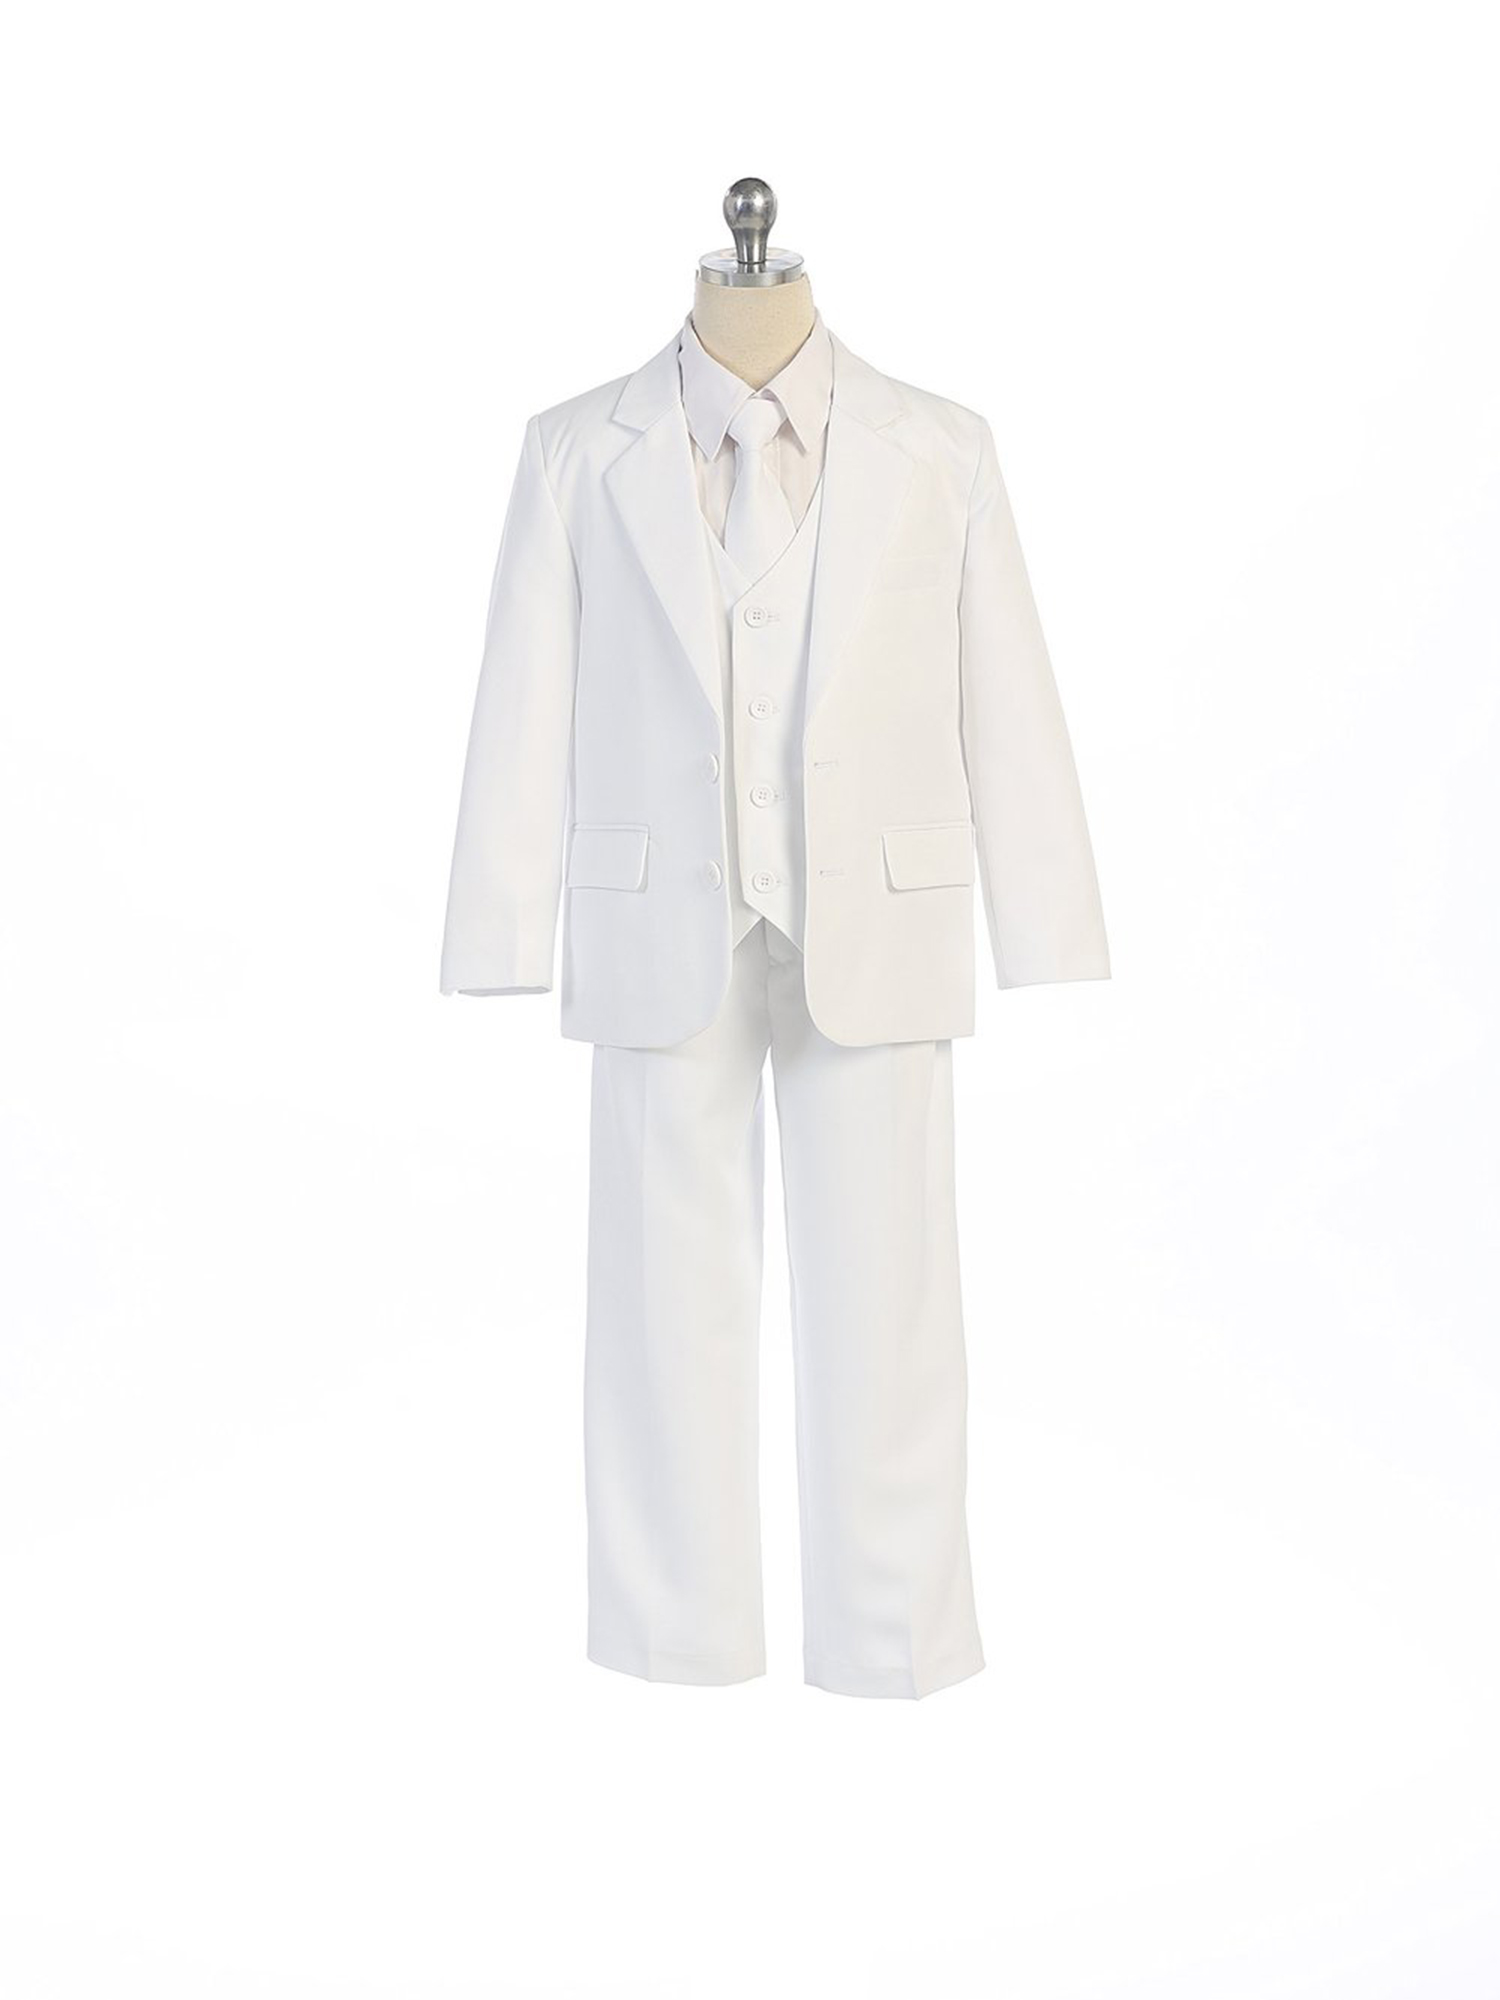 COLE Boys Suit with Shirt and Vest (5-Piece) - White - Size 18